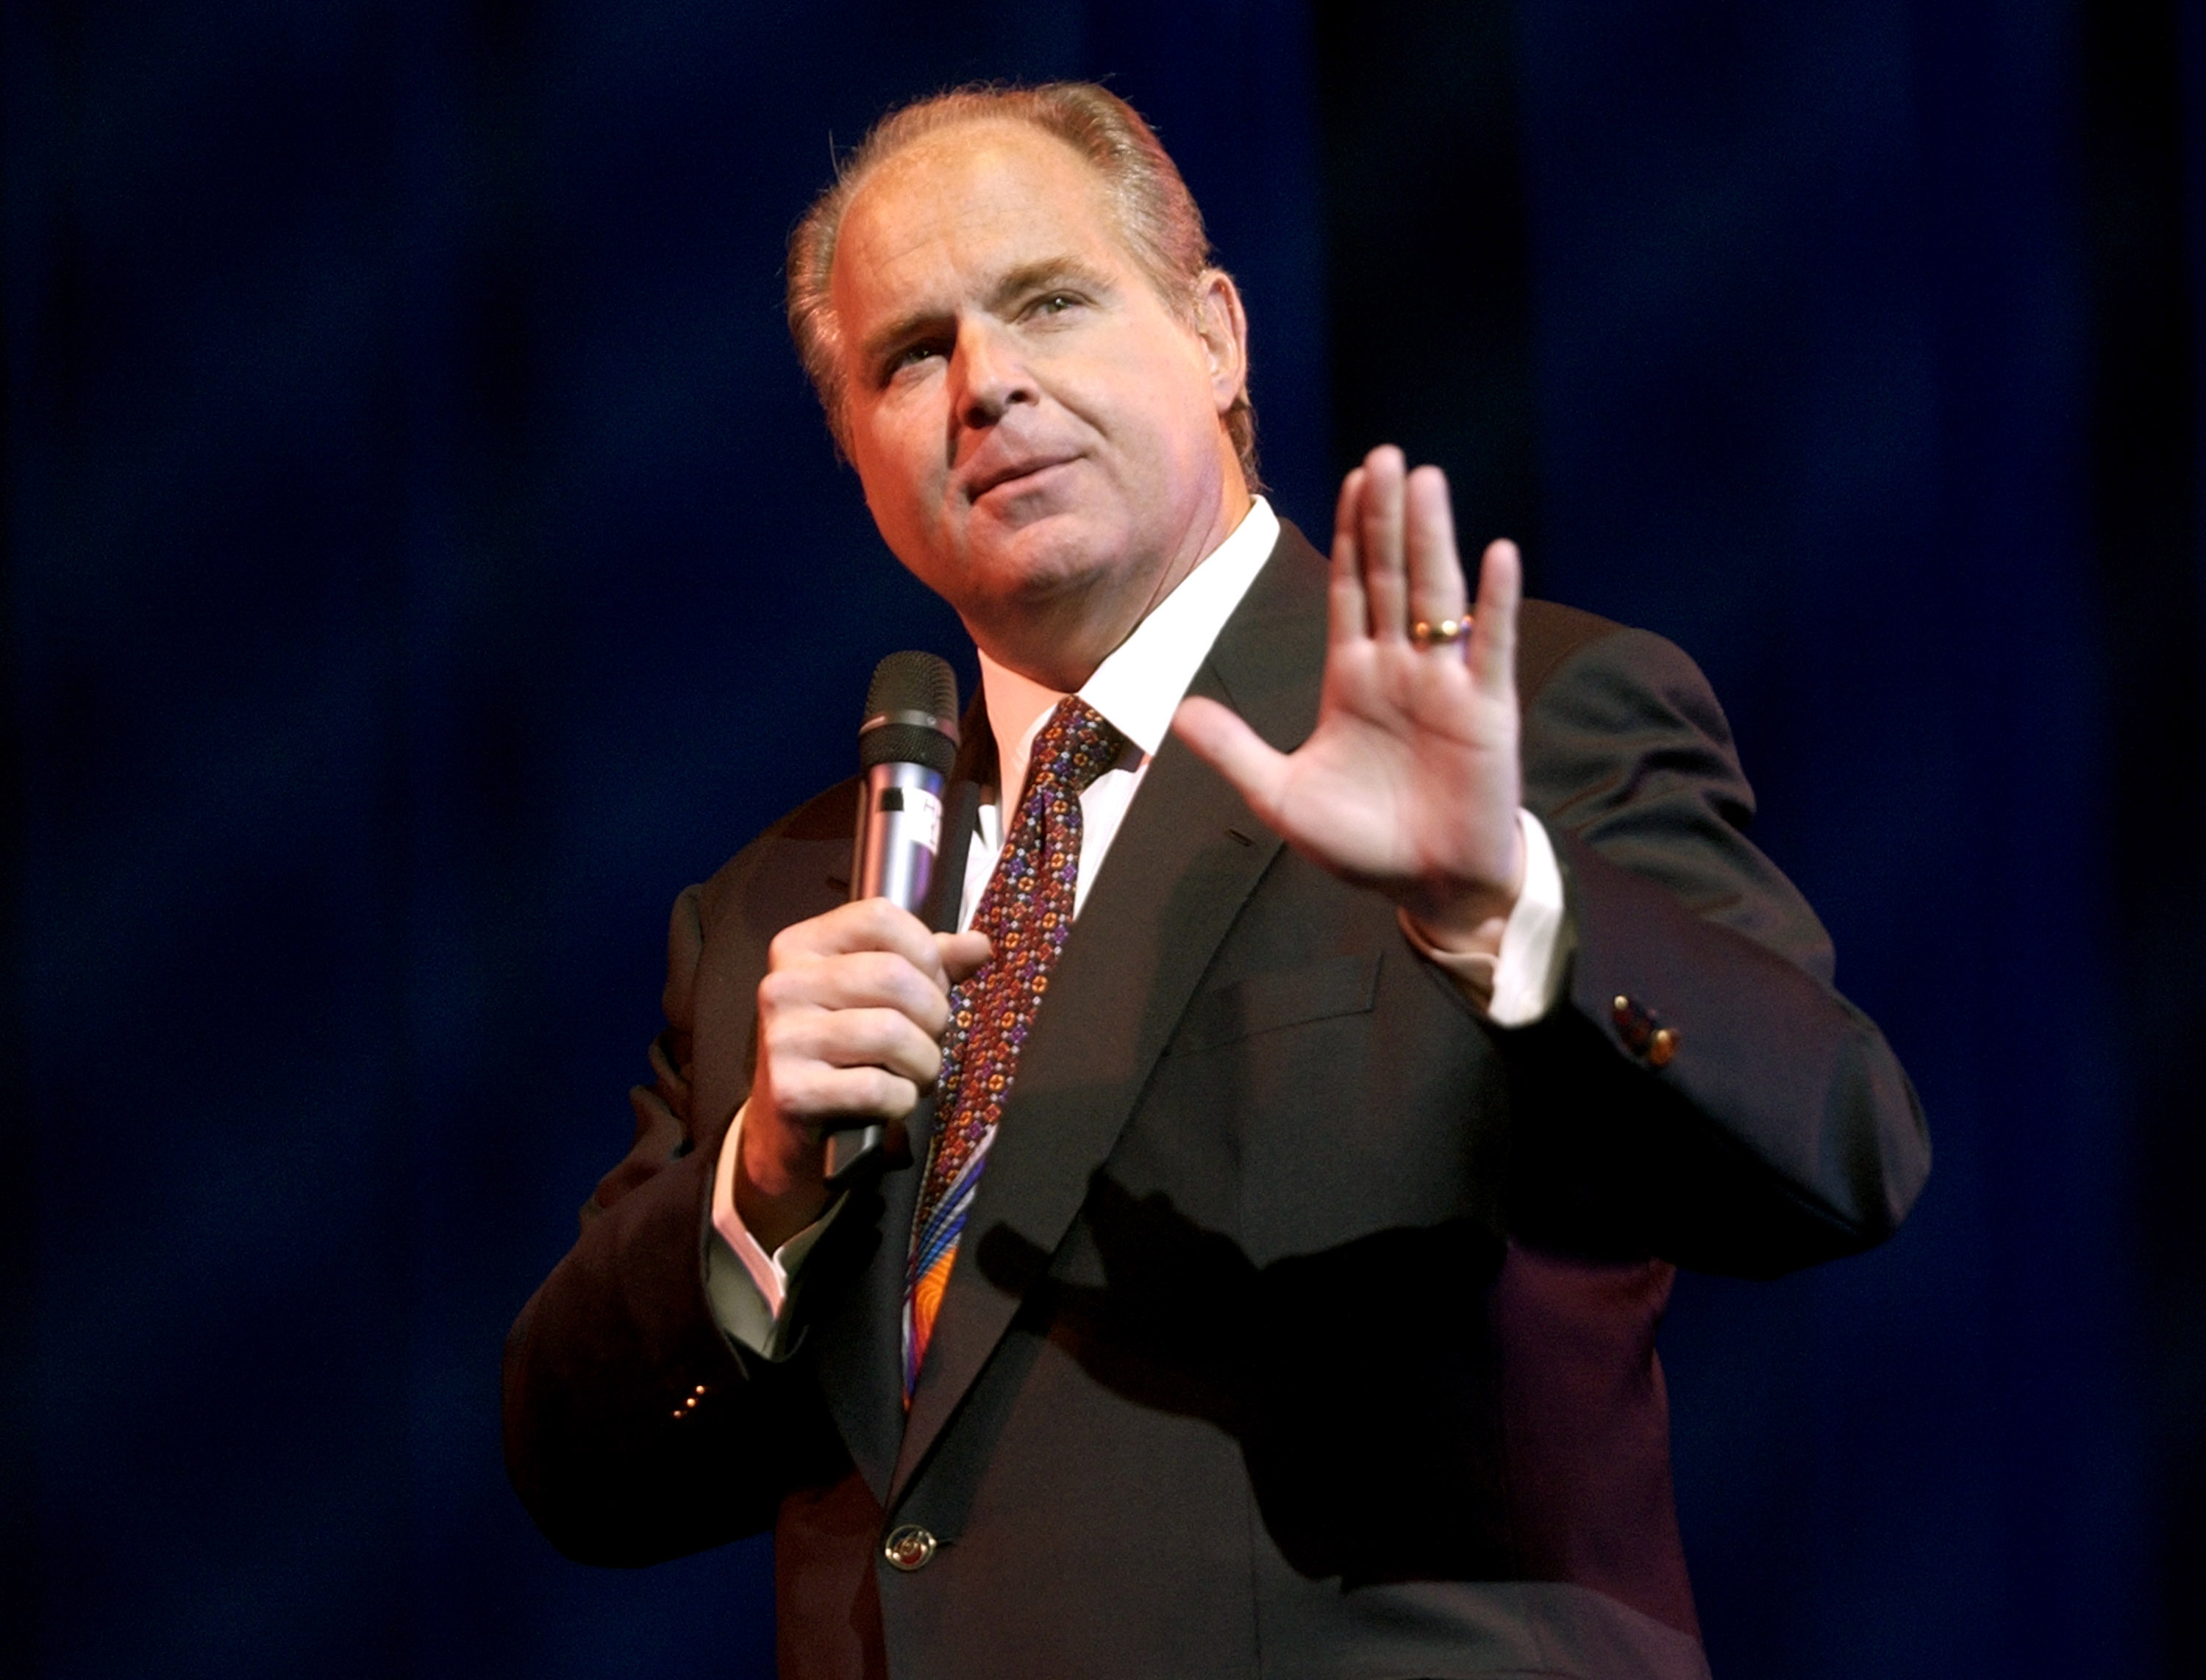 Rush Limbaugh with a microphone